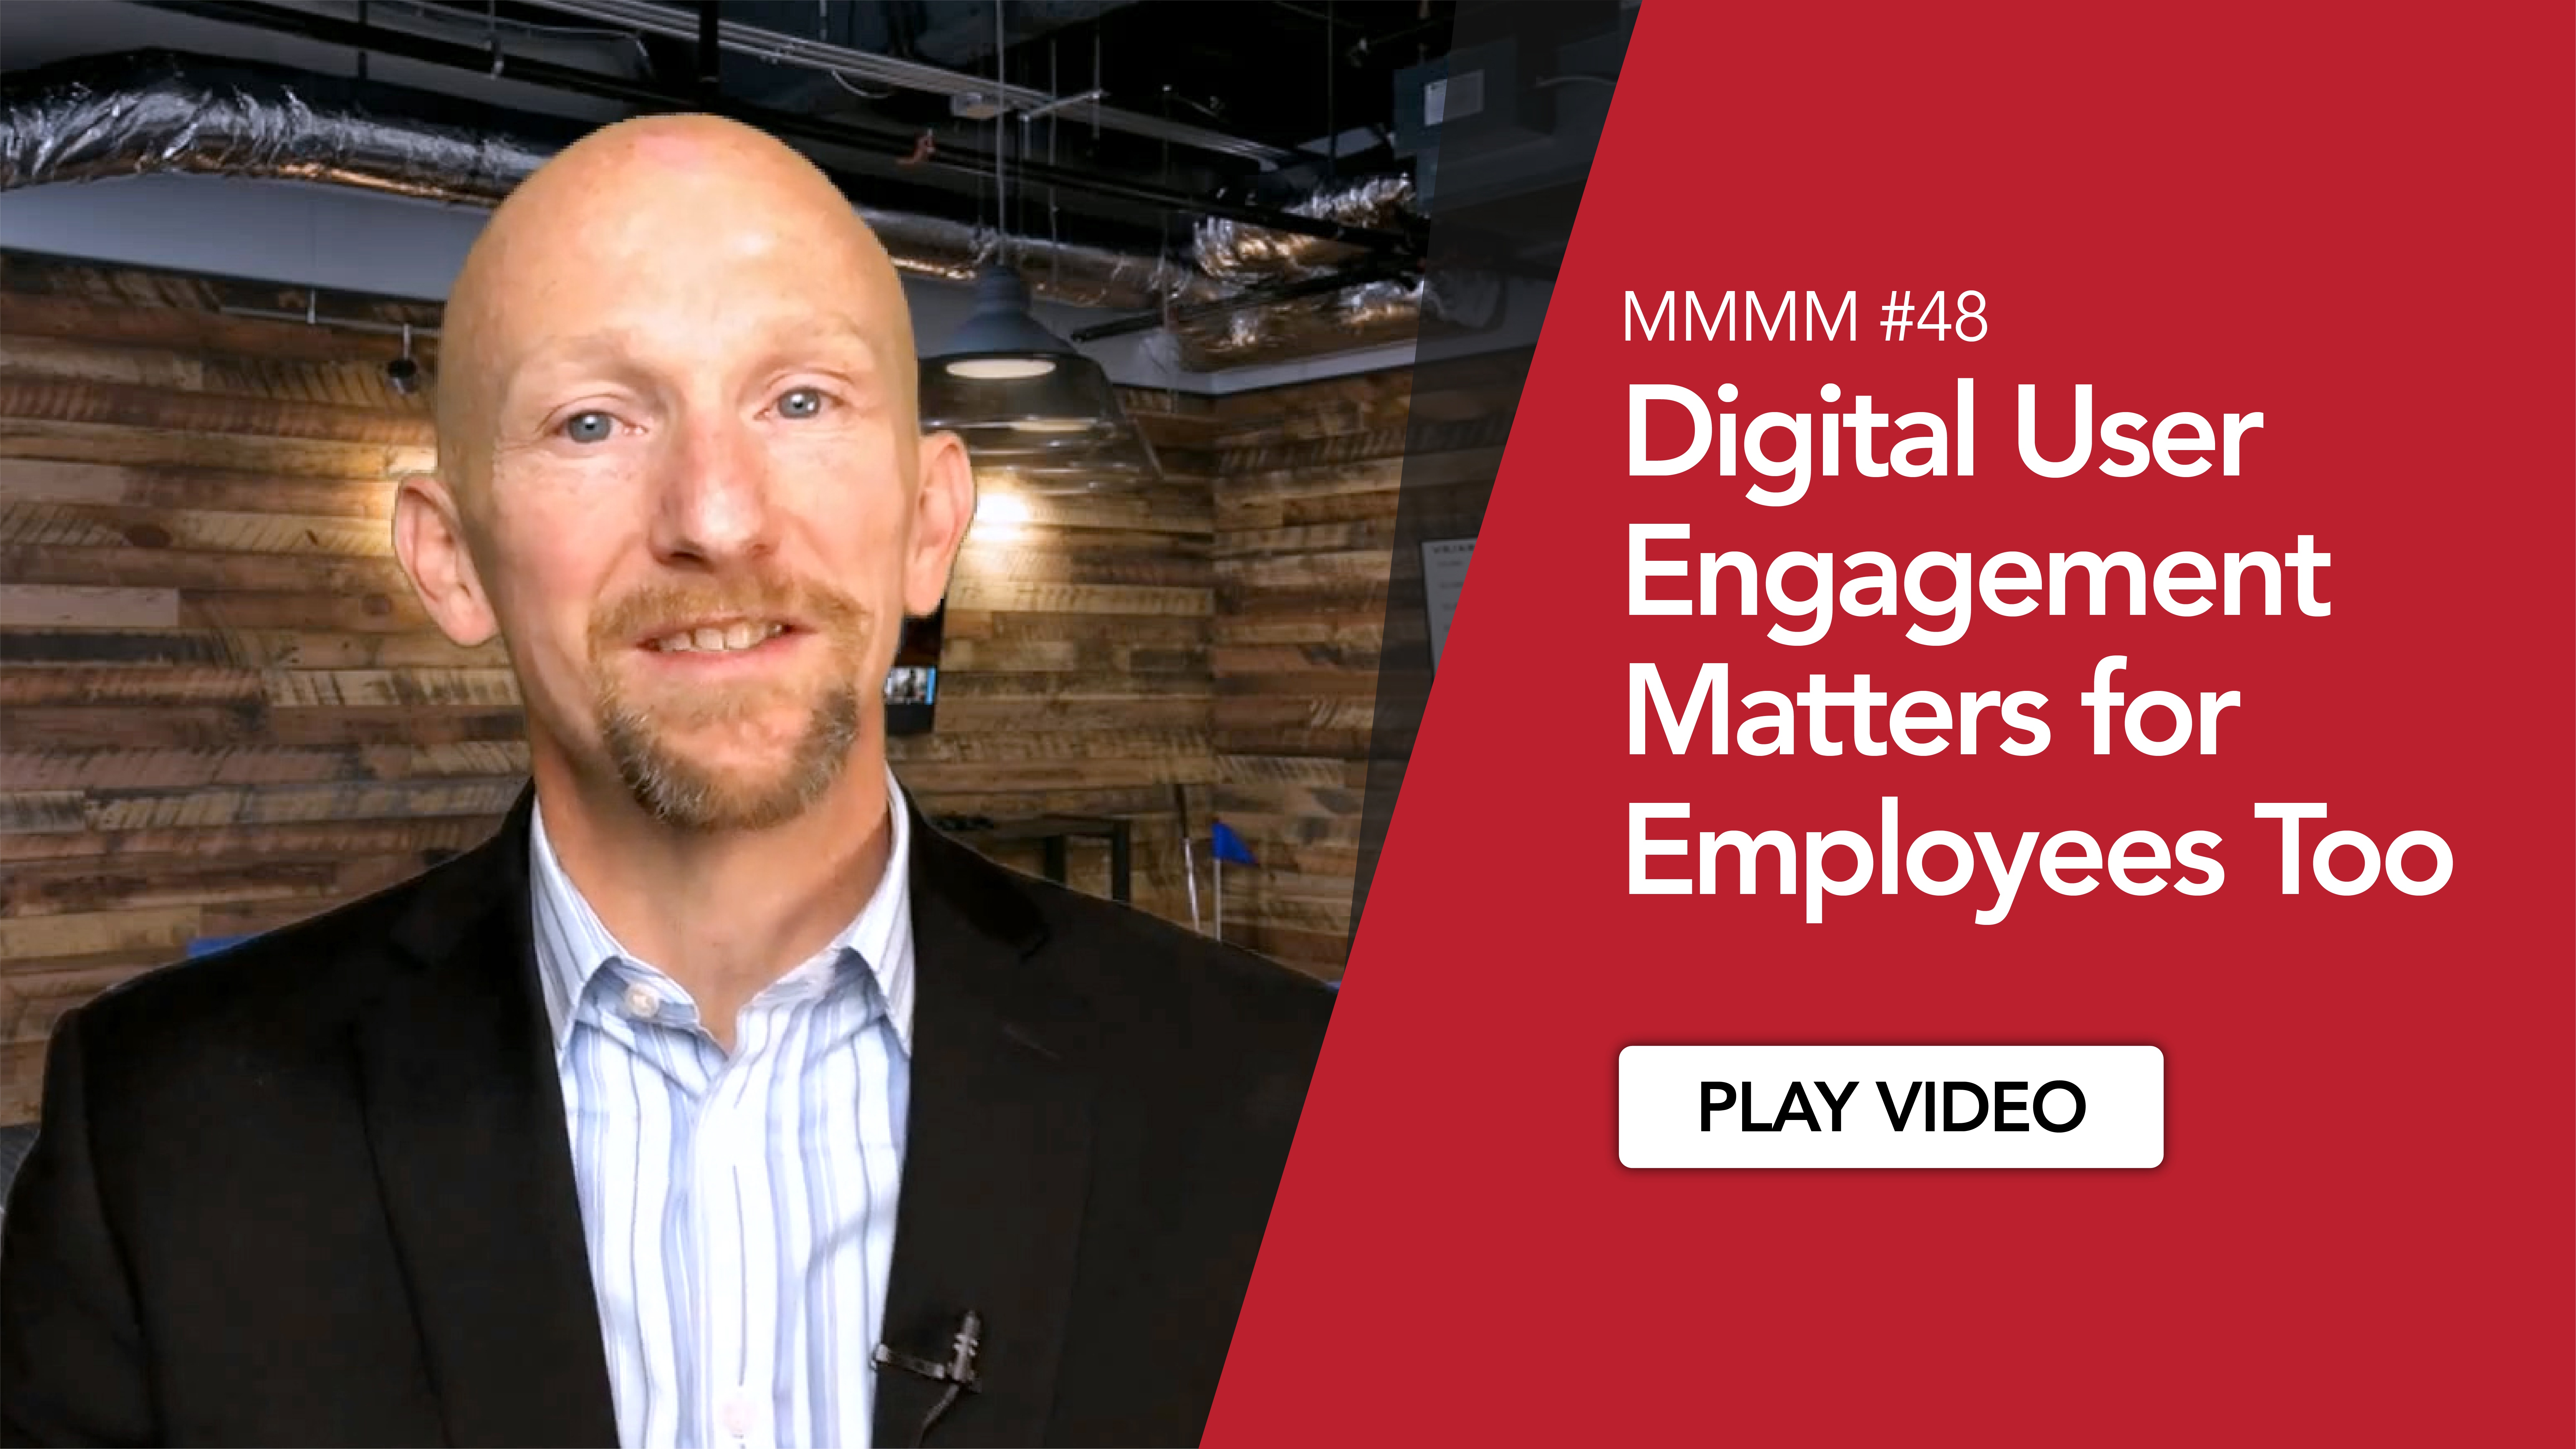 MMMM #48 - Digital User Engagement Matters for Employees Too